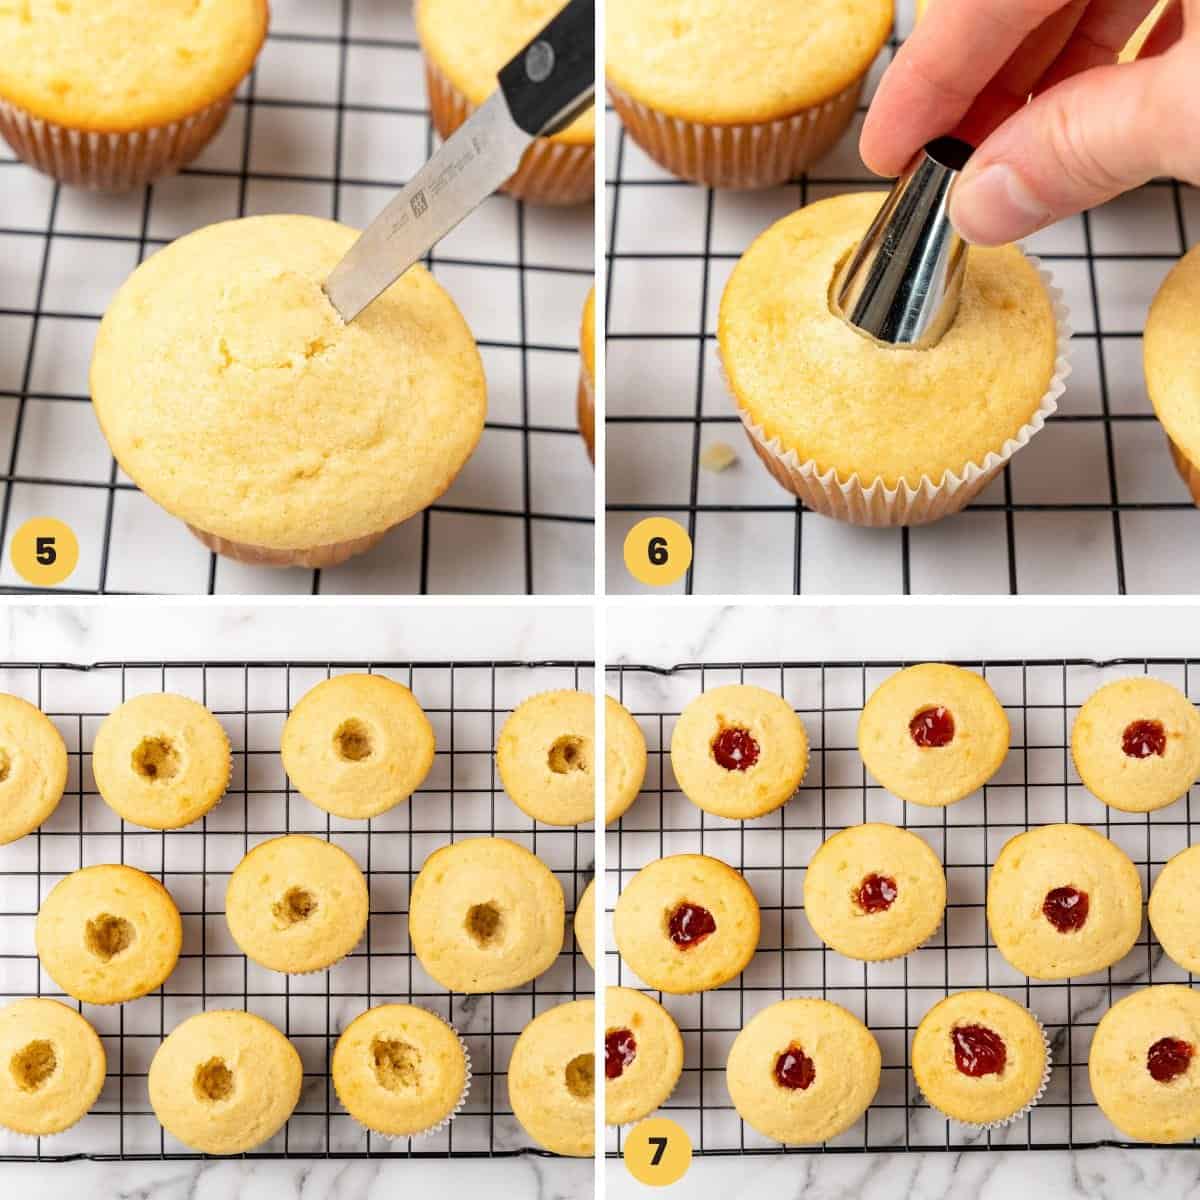 A collage of four numbered images showing how to use a knife and piping tip to make holes in the top of cupcakes, then fill them with jam.